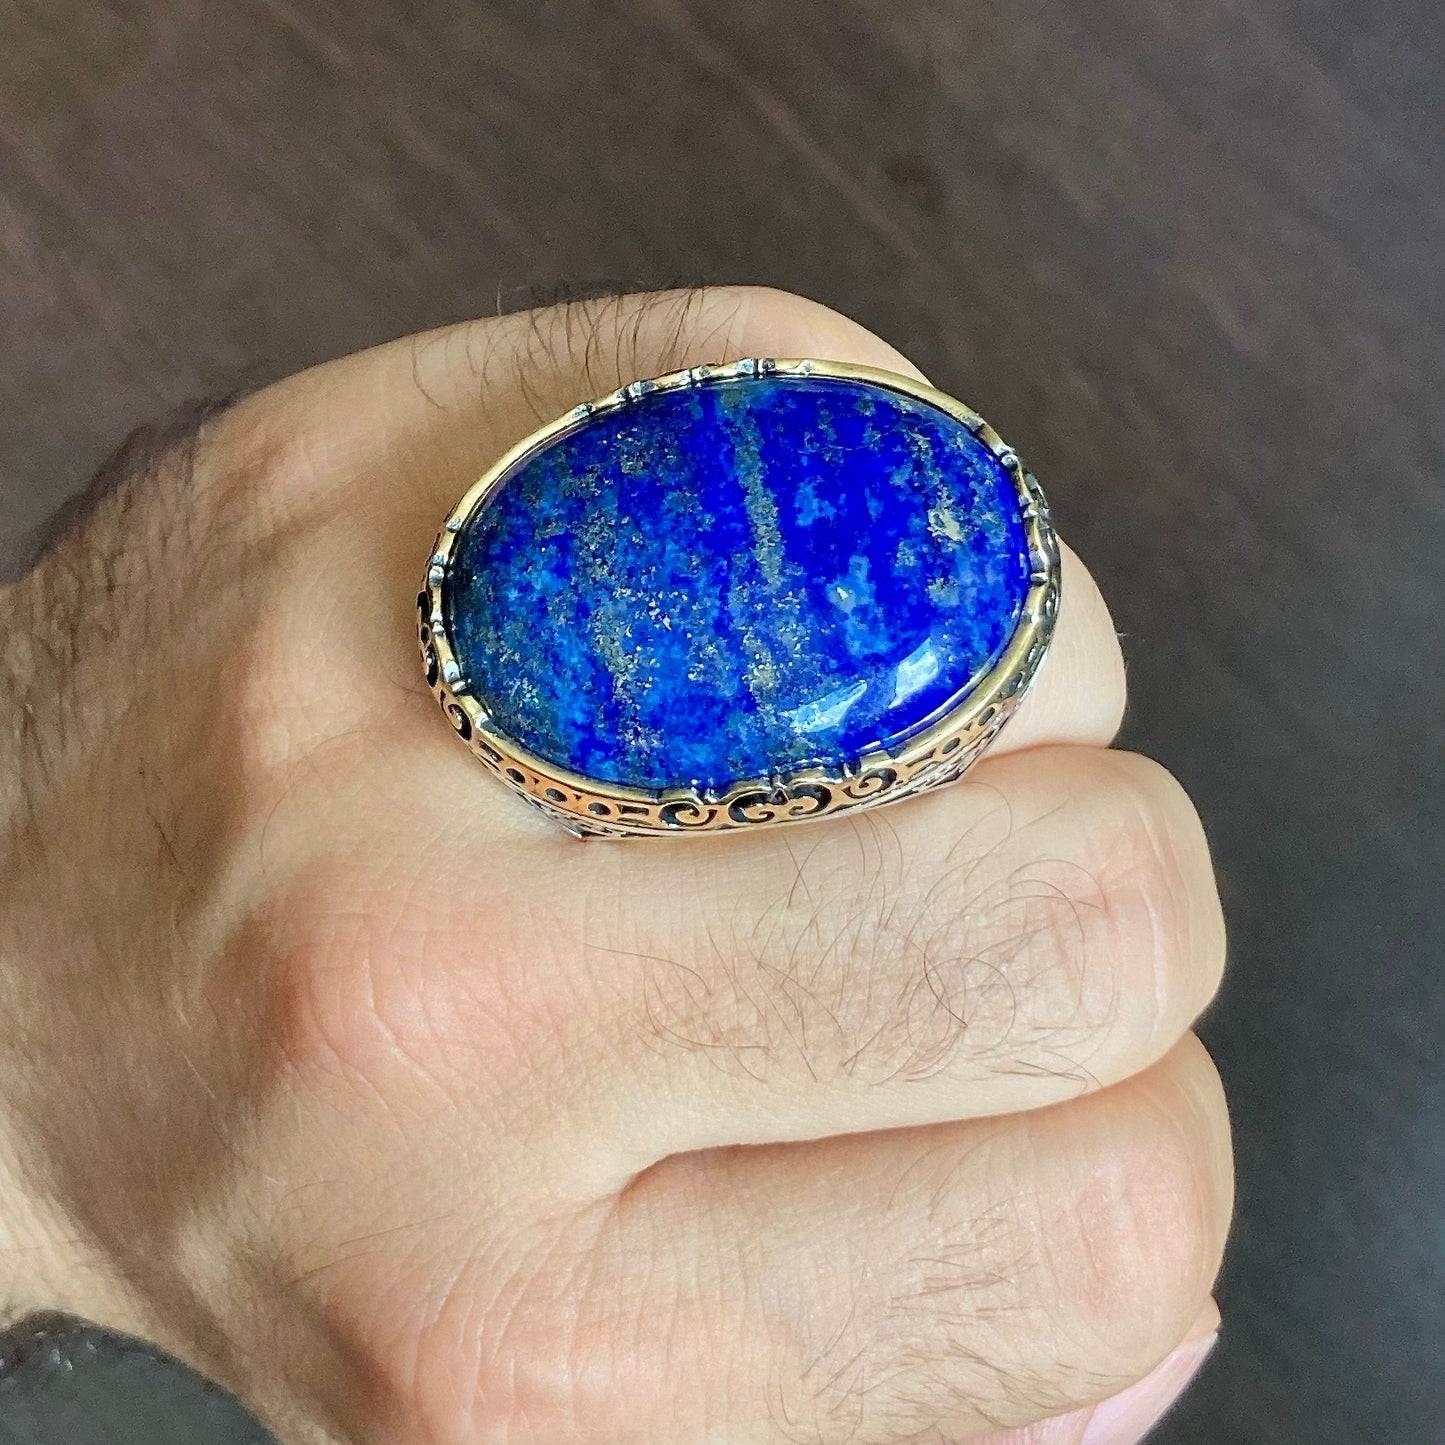 Sterling Silver Mens Ring Huge Lapis Lazuli Unique Artisan Statement Jewelry